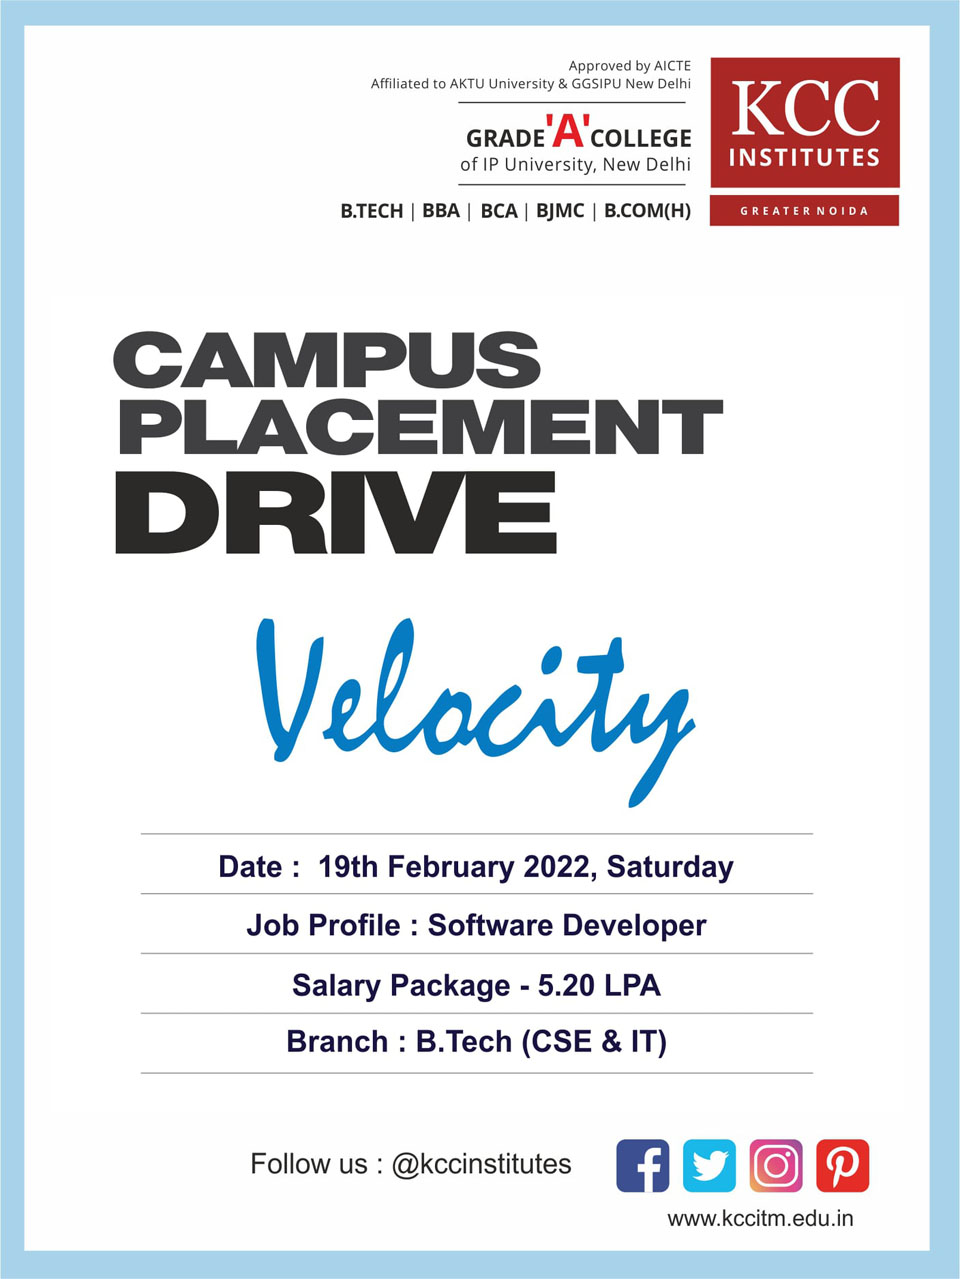 Campus Placement Drive for Velocity on 19th February 2022 (Saturday)